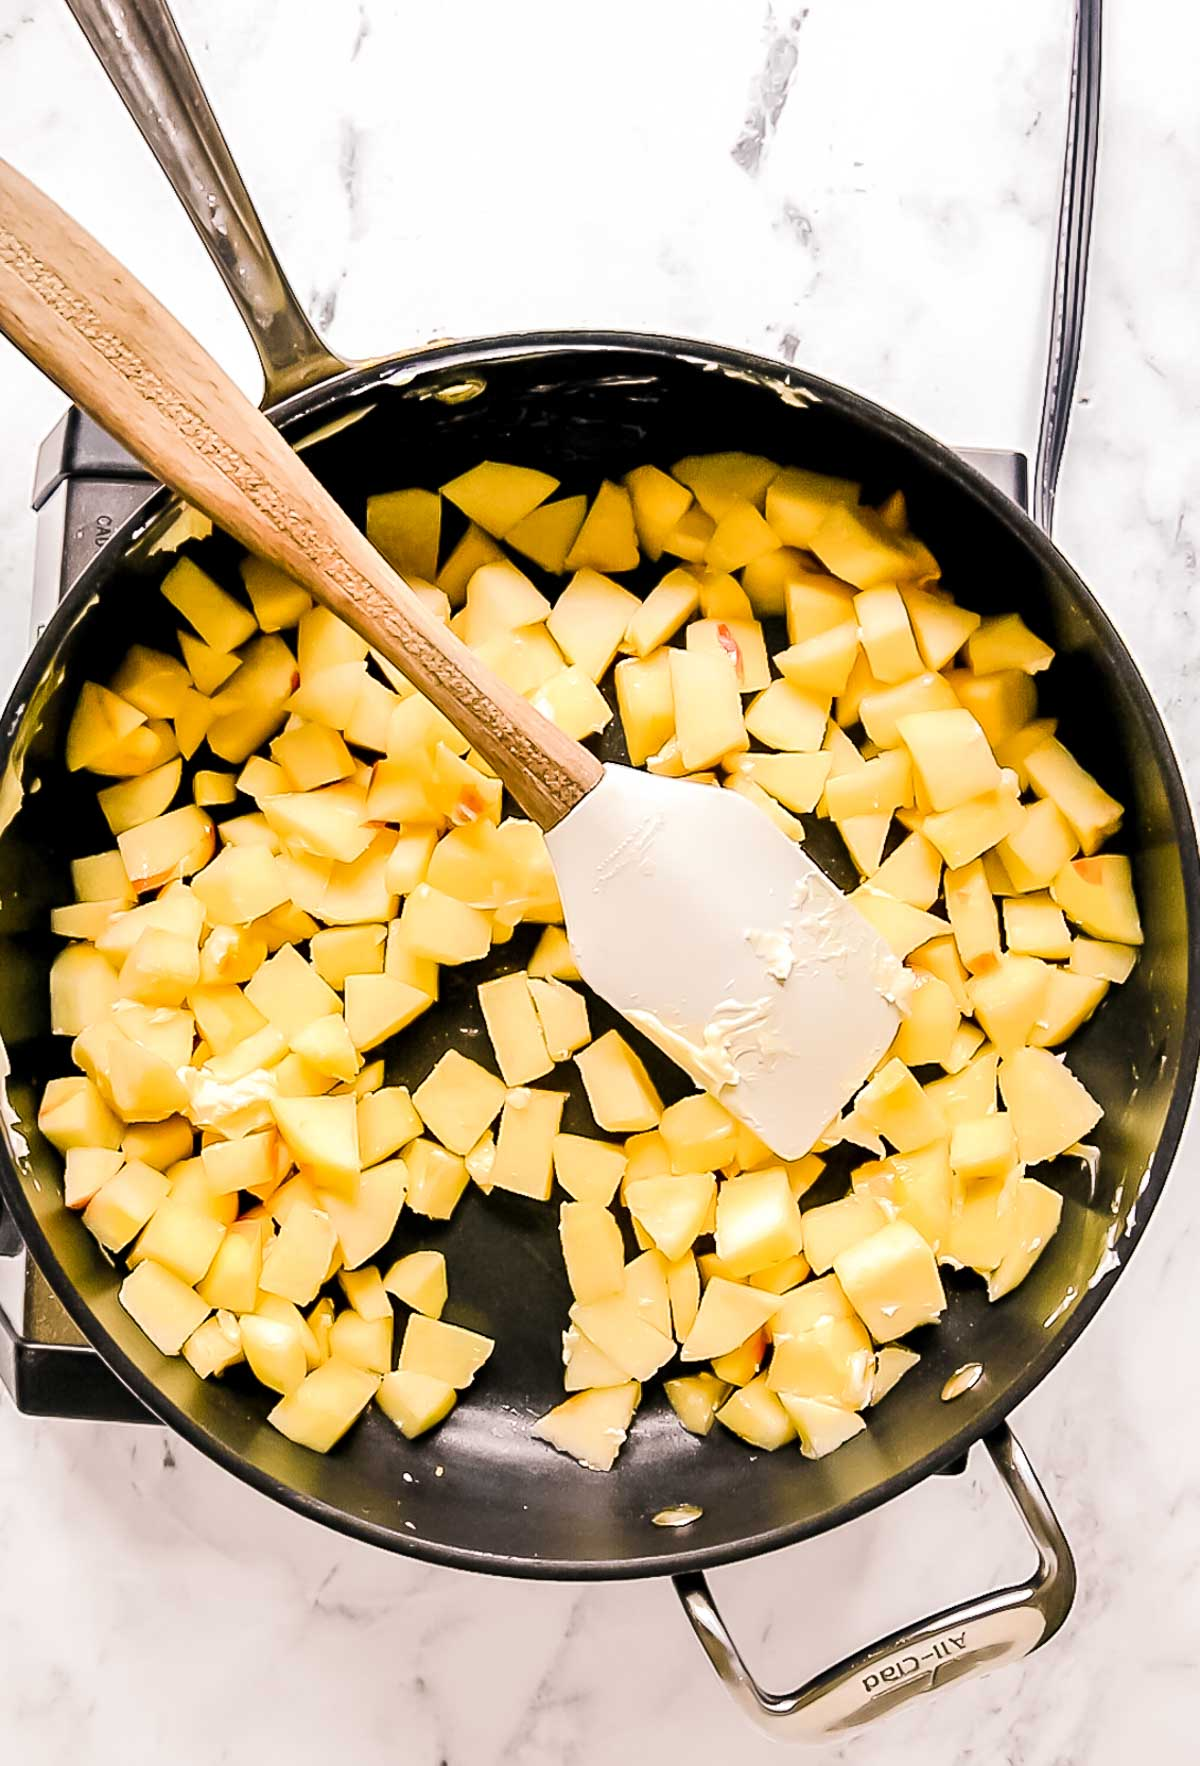 diced apples in saucepan with spatula